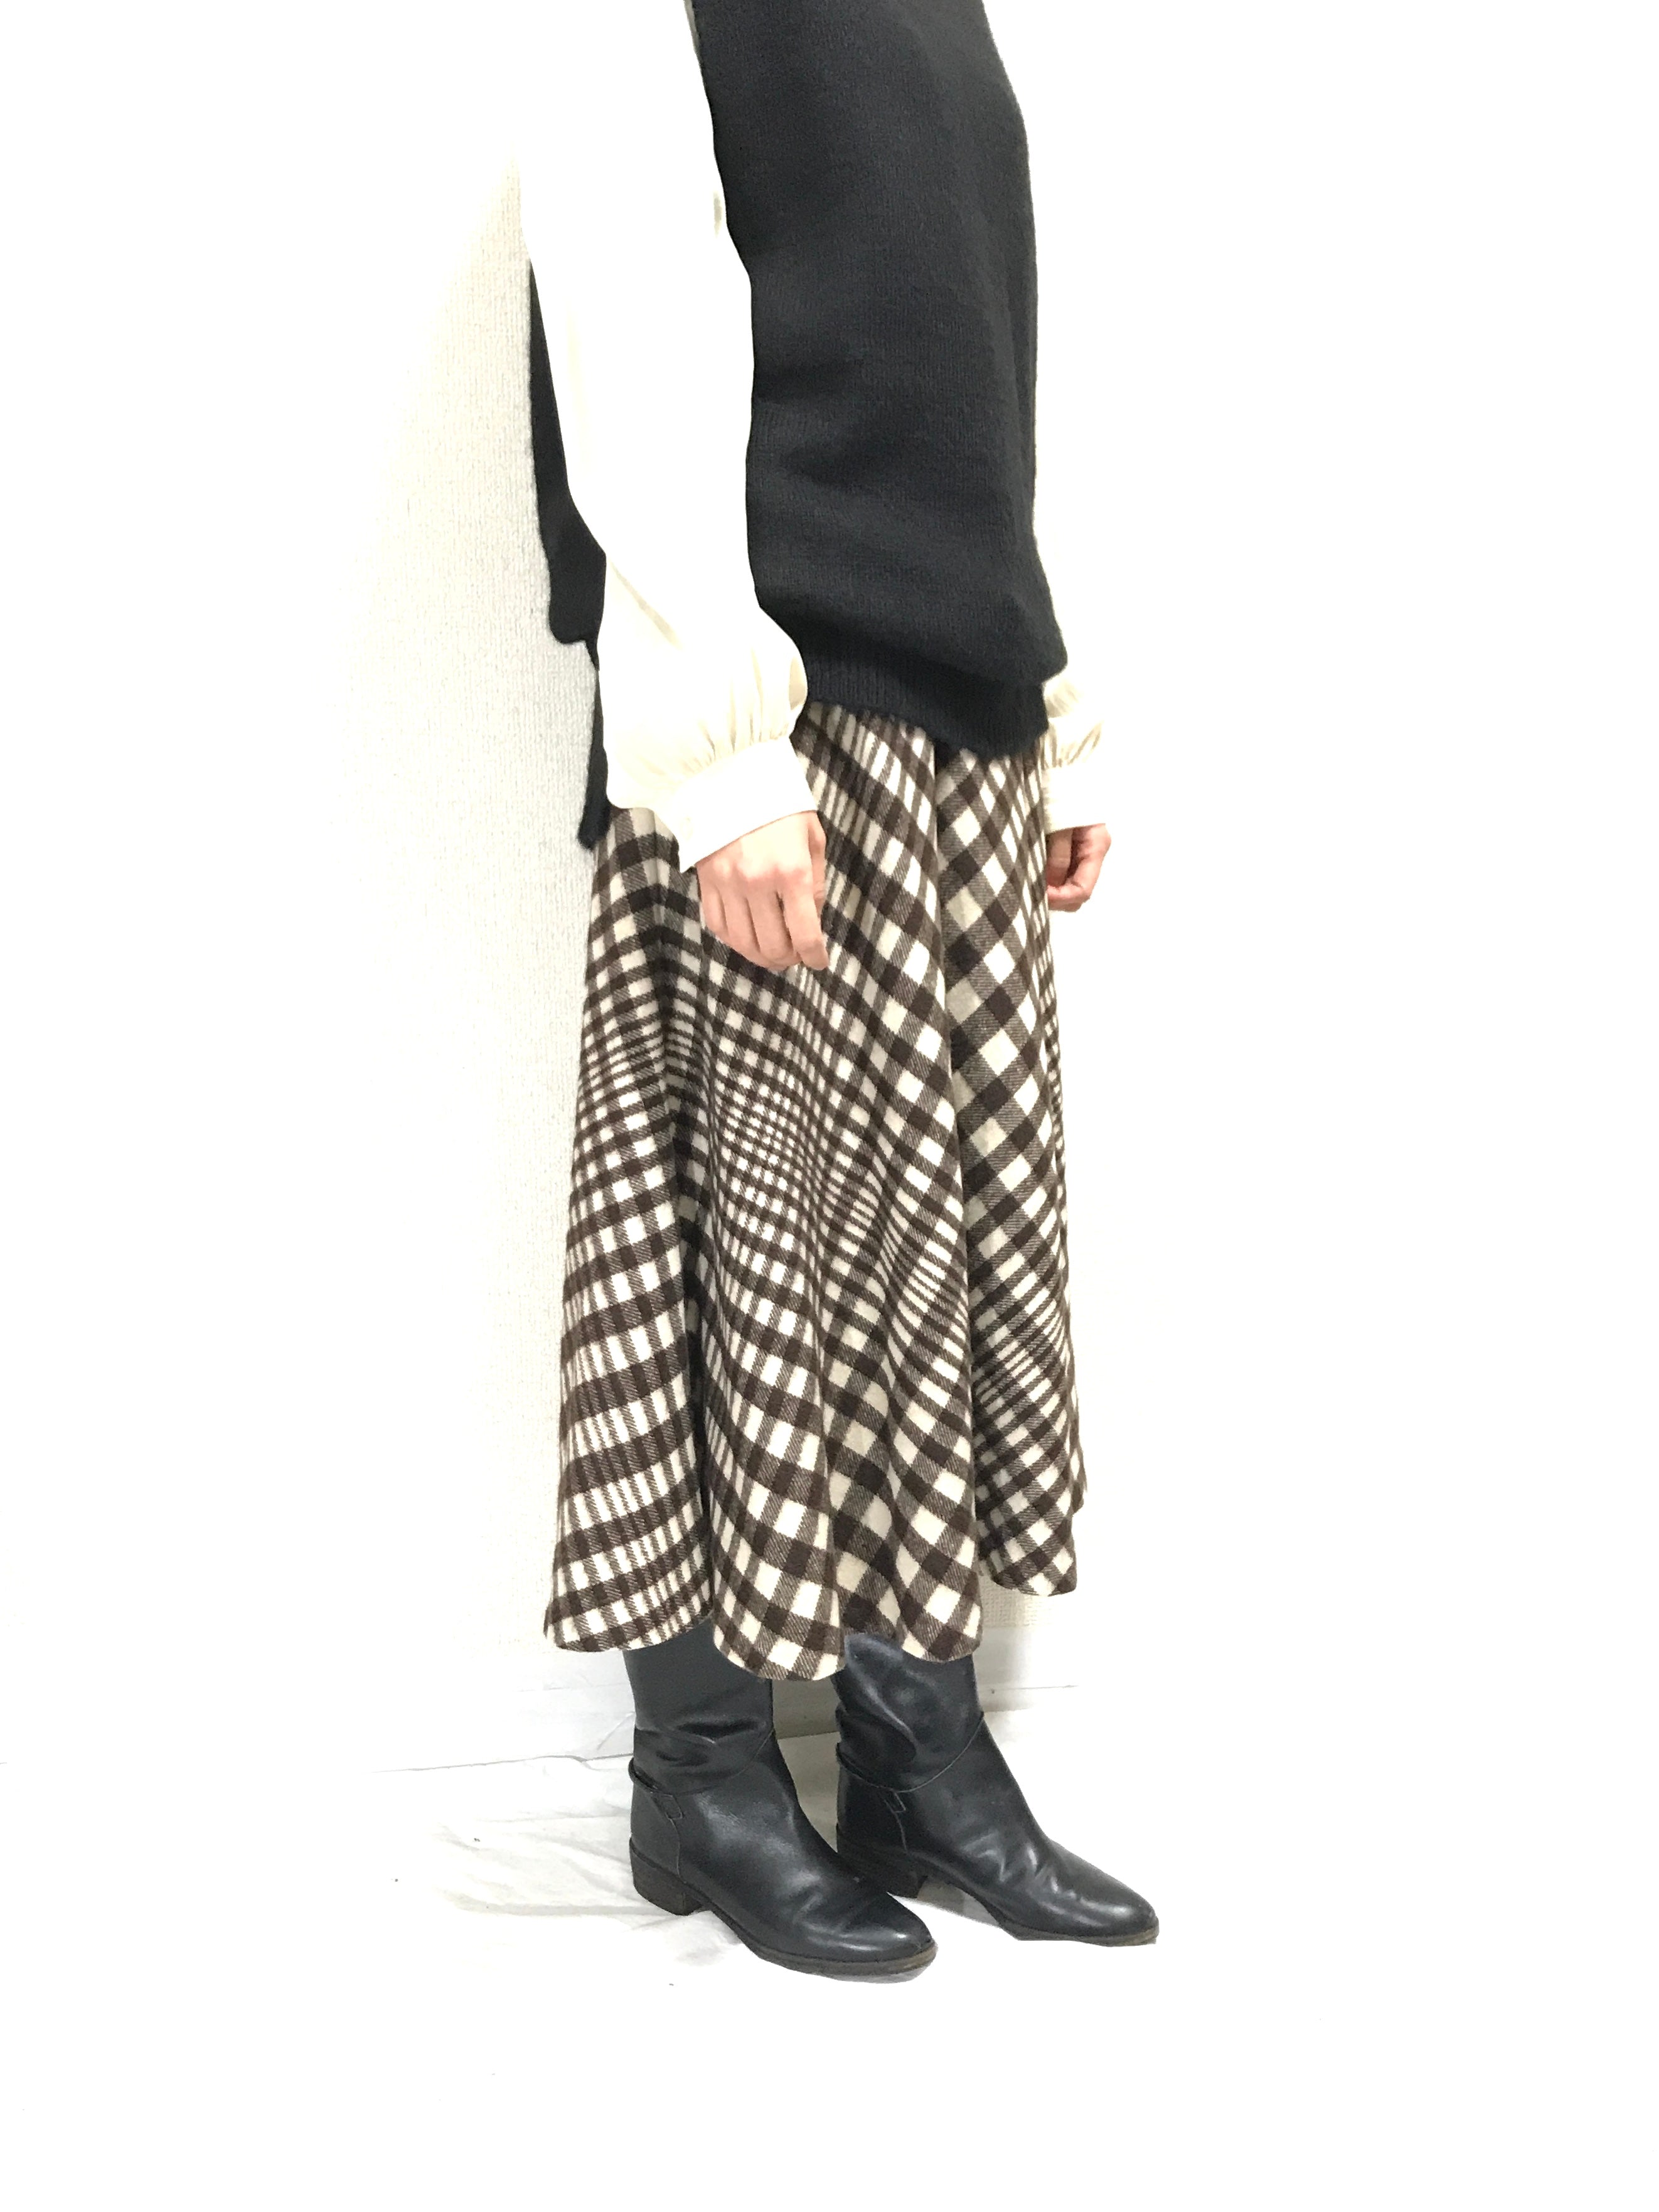 80’s French label wool pattern flare skirt